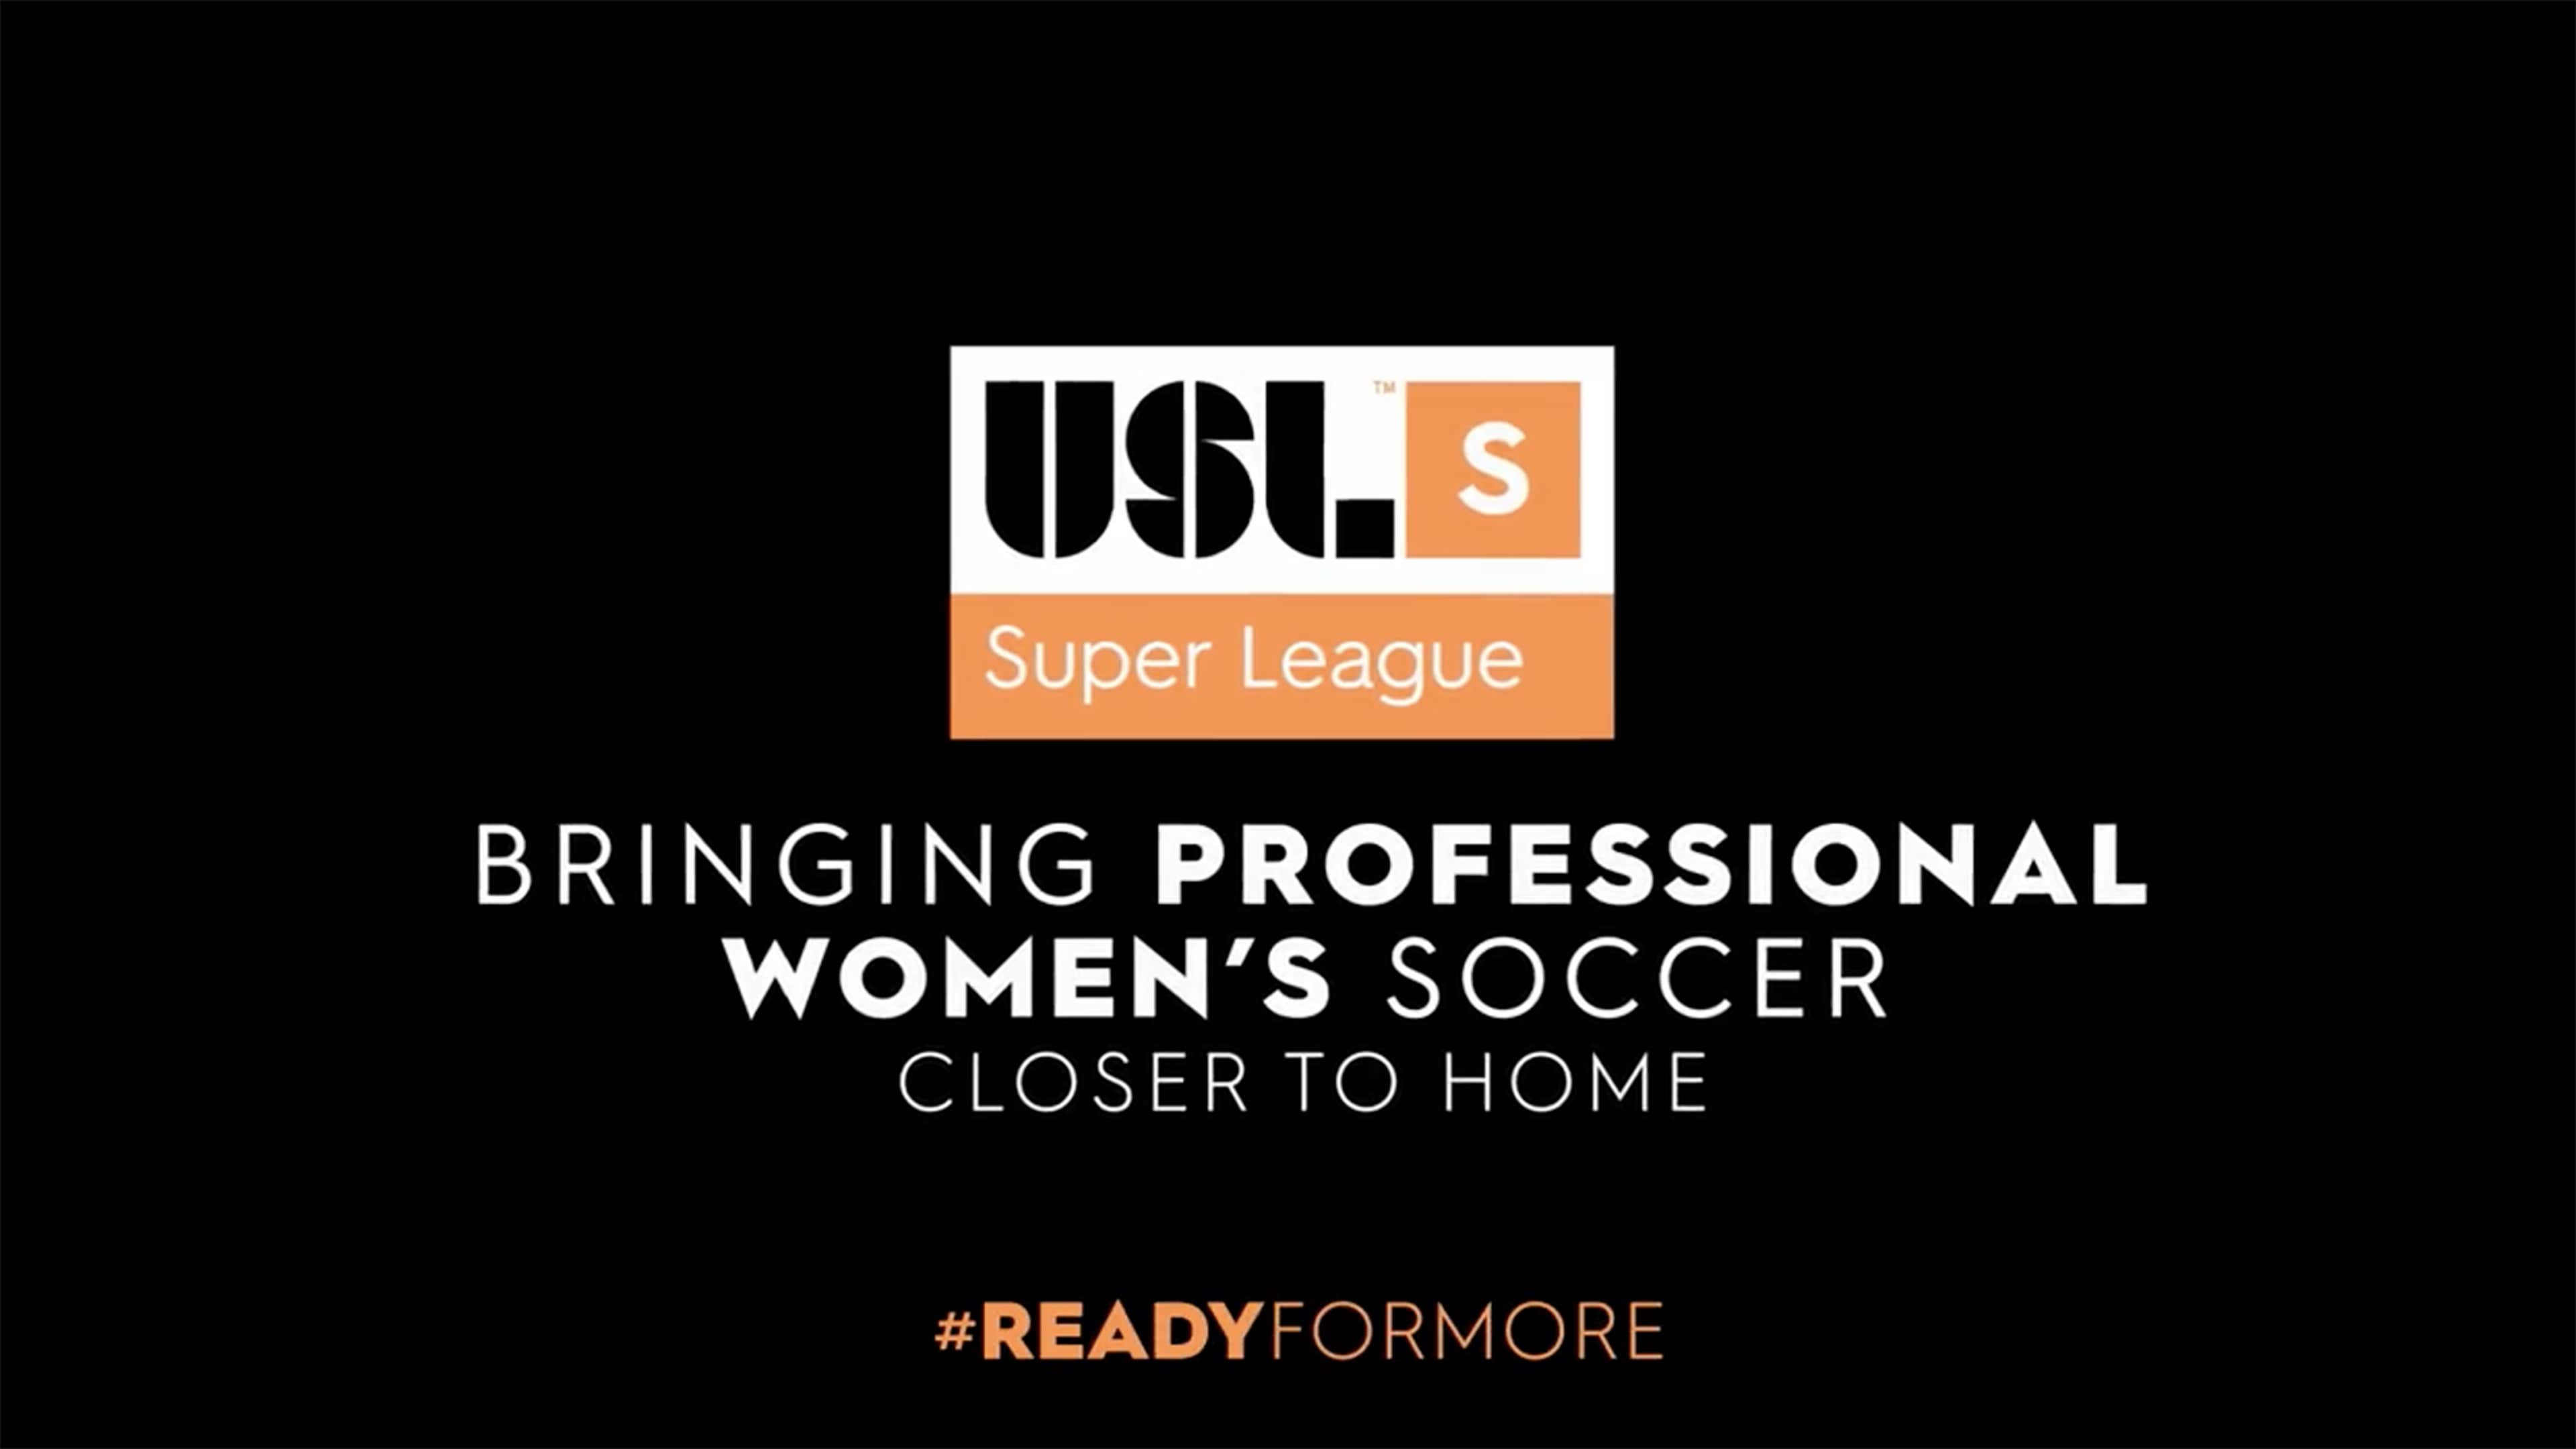 UWS & NISA Announce The Launch Of A Professional Women's League